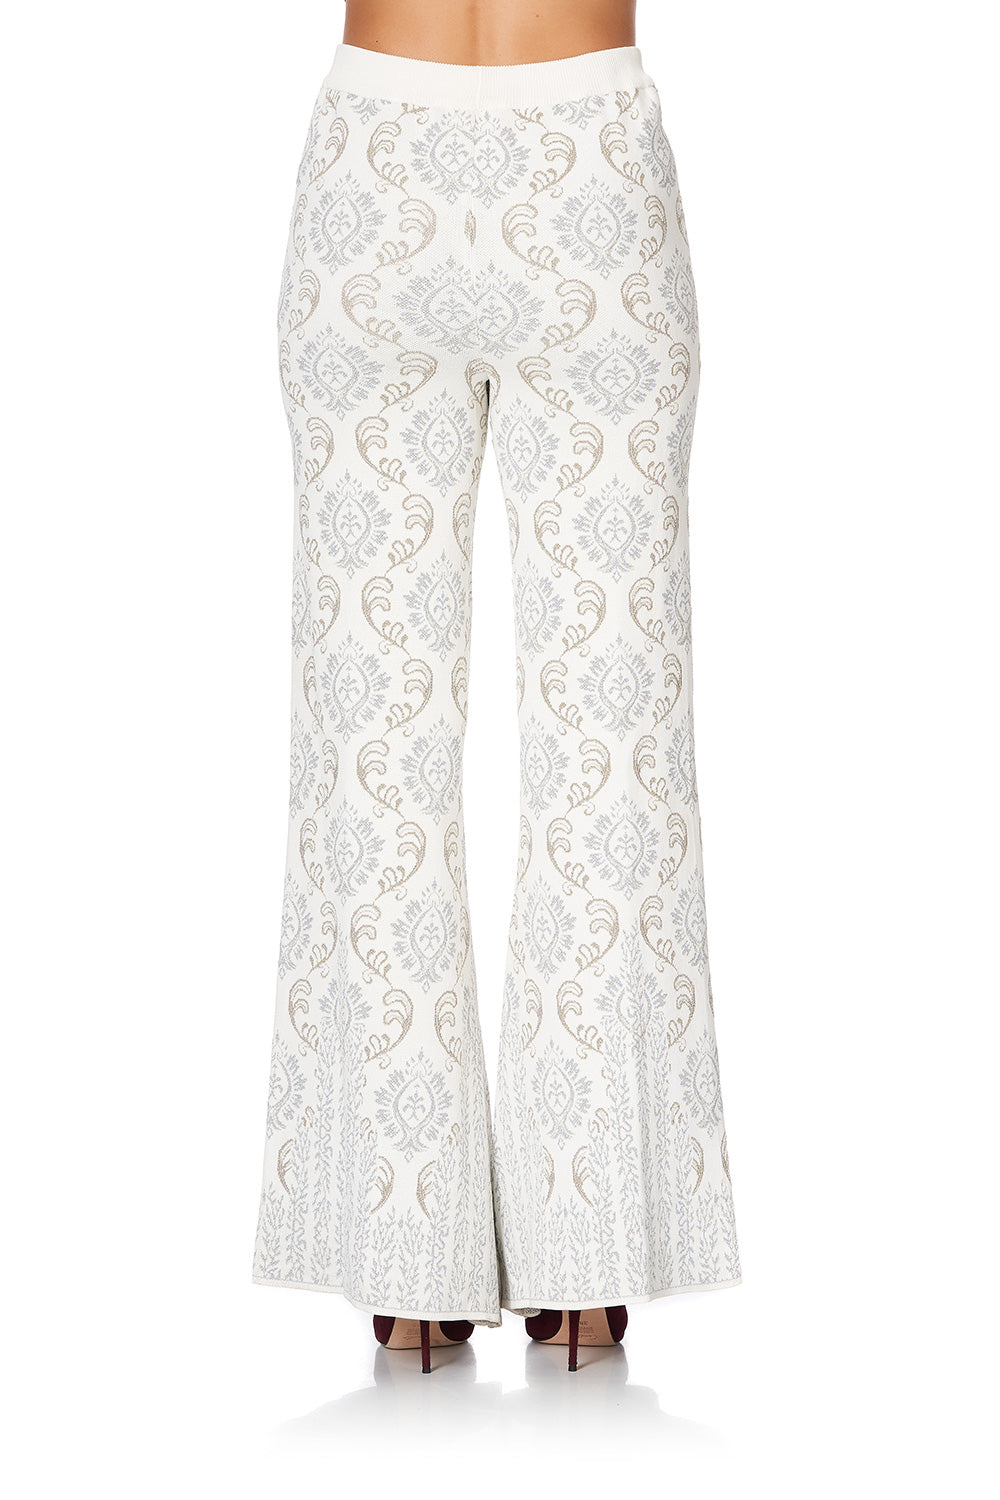 FLARED KNIT PANT CRYSTAL CASTLE